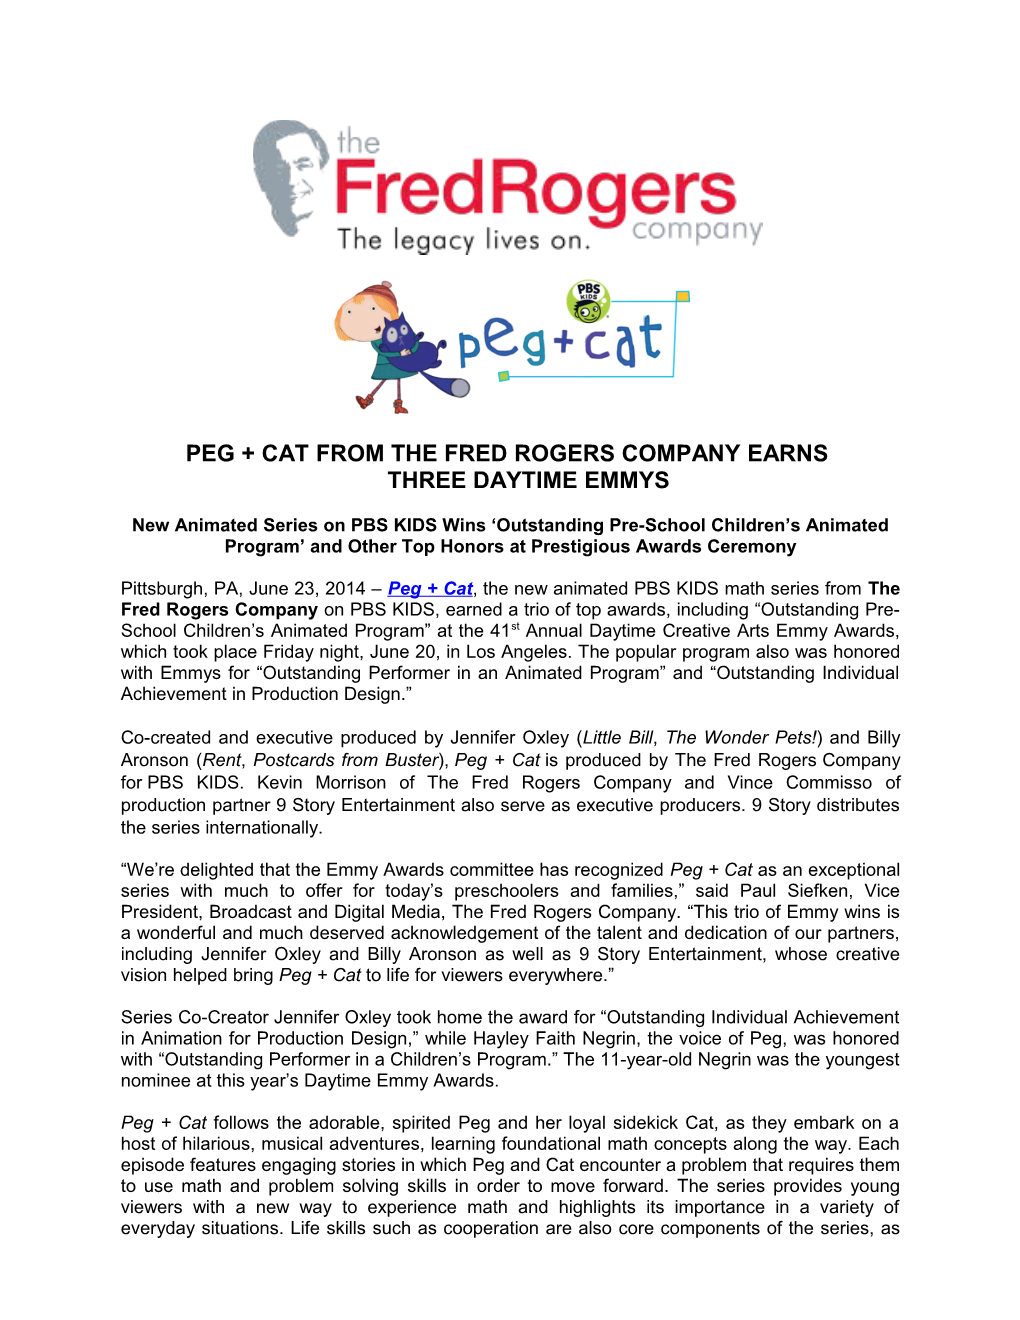 Peg + Cat from the Fred Rogers Company Earnsthreedaytime Emmys